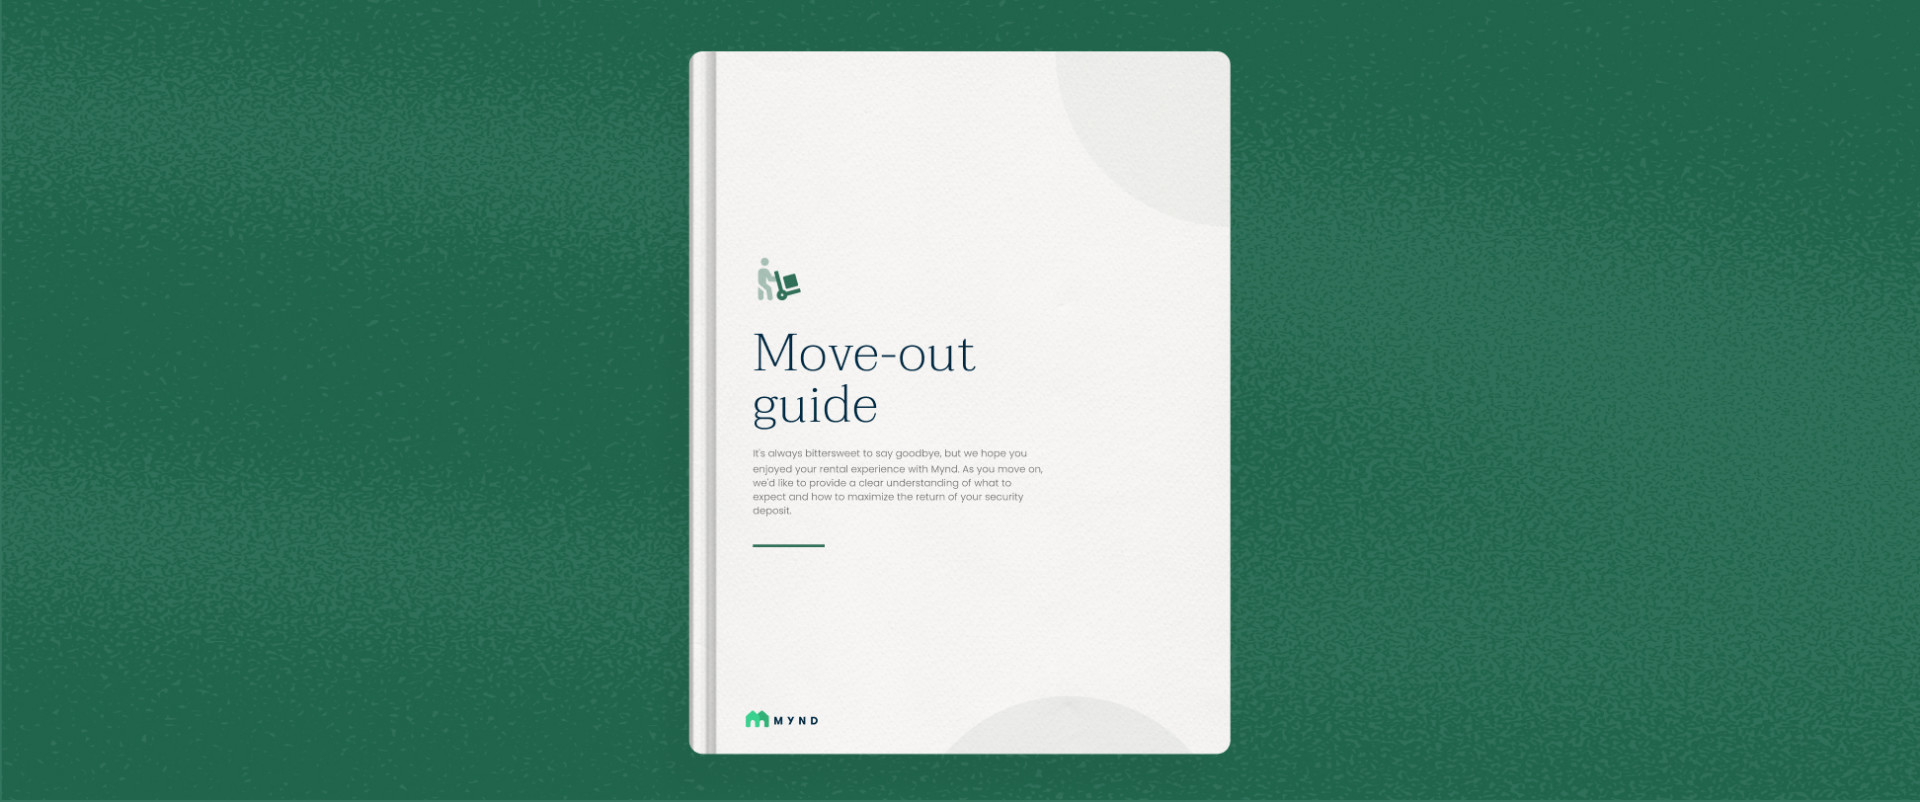 Image of the book titled Move-in guide